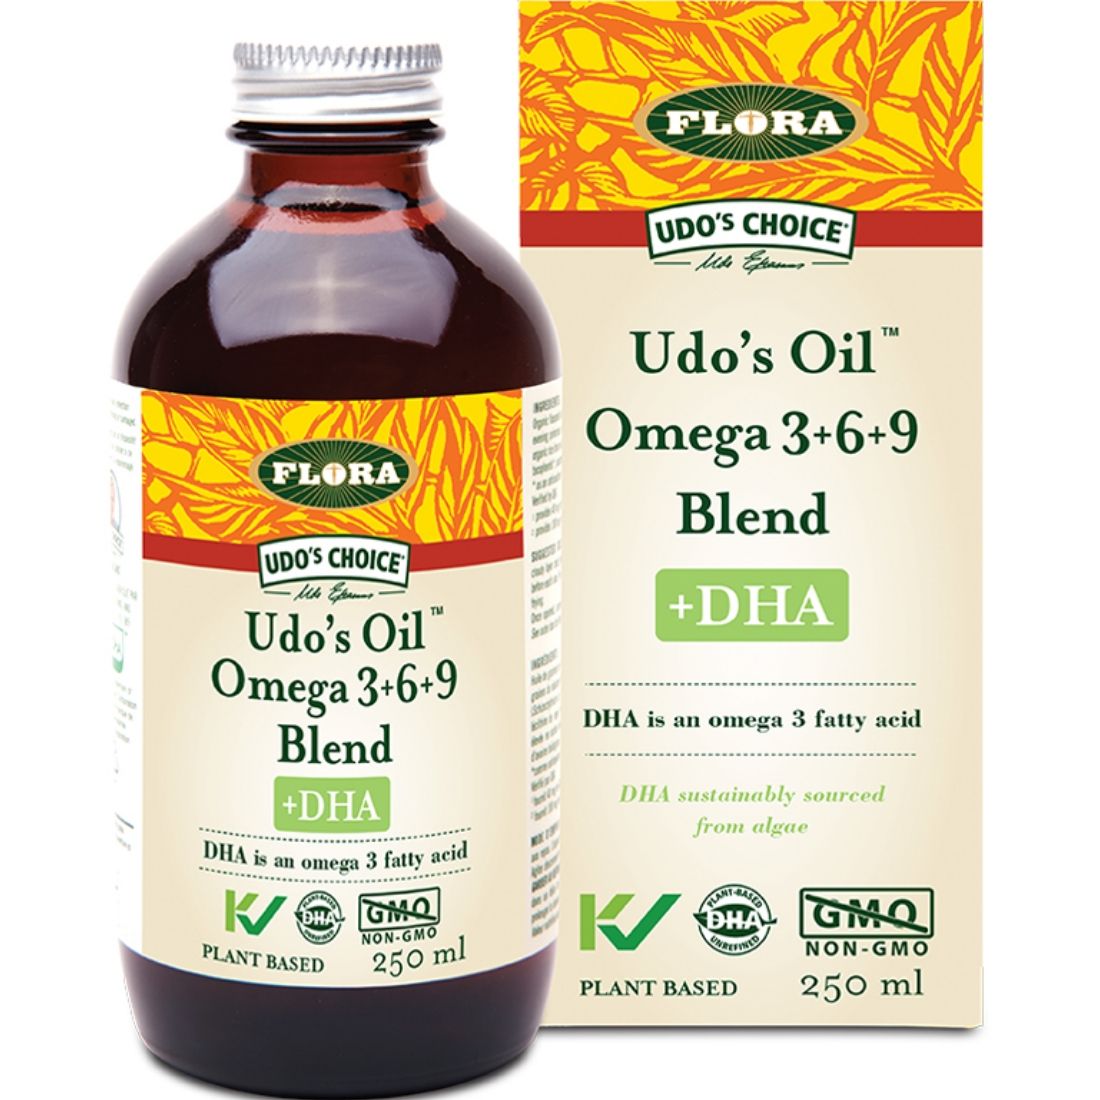 Flora Udo's Choice Udo’s Oil DHA 3-6-9 Blend (Refrigerated)